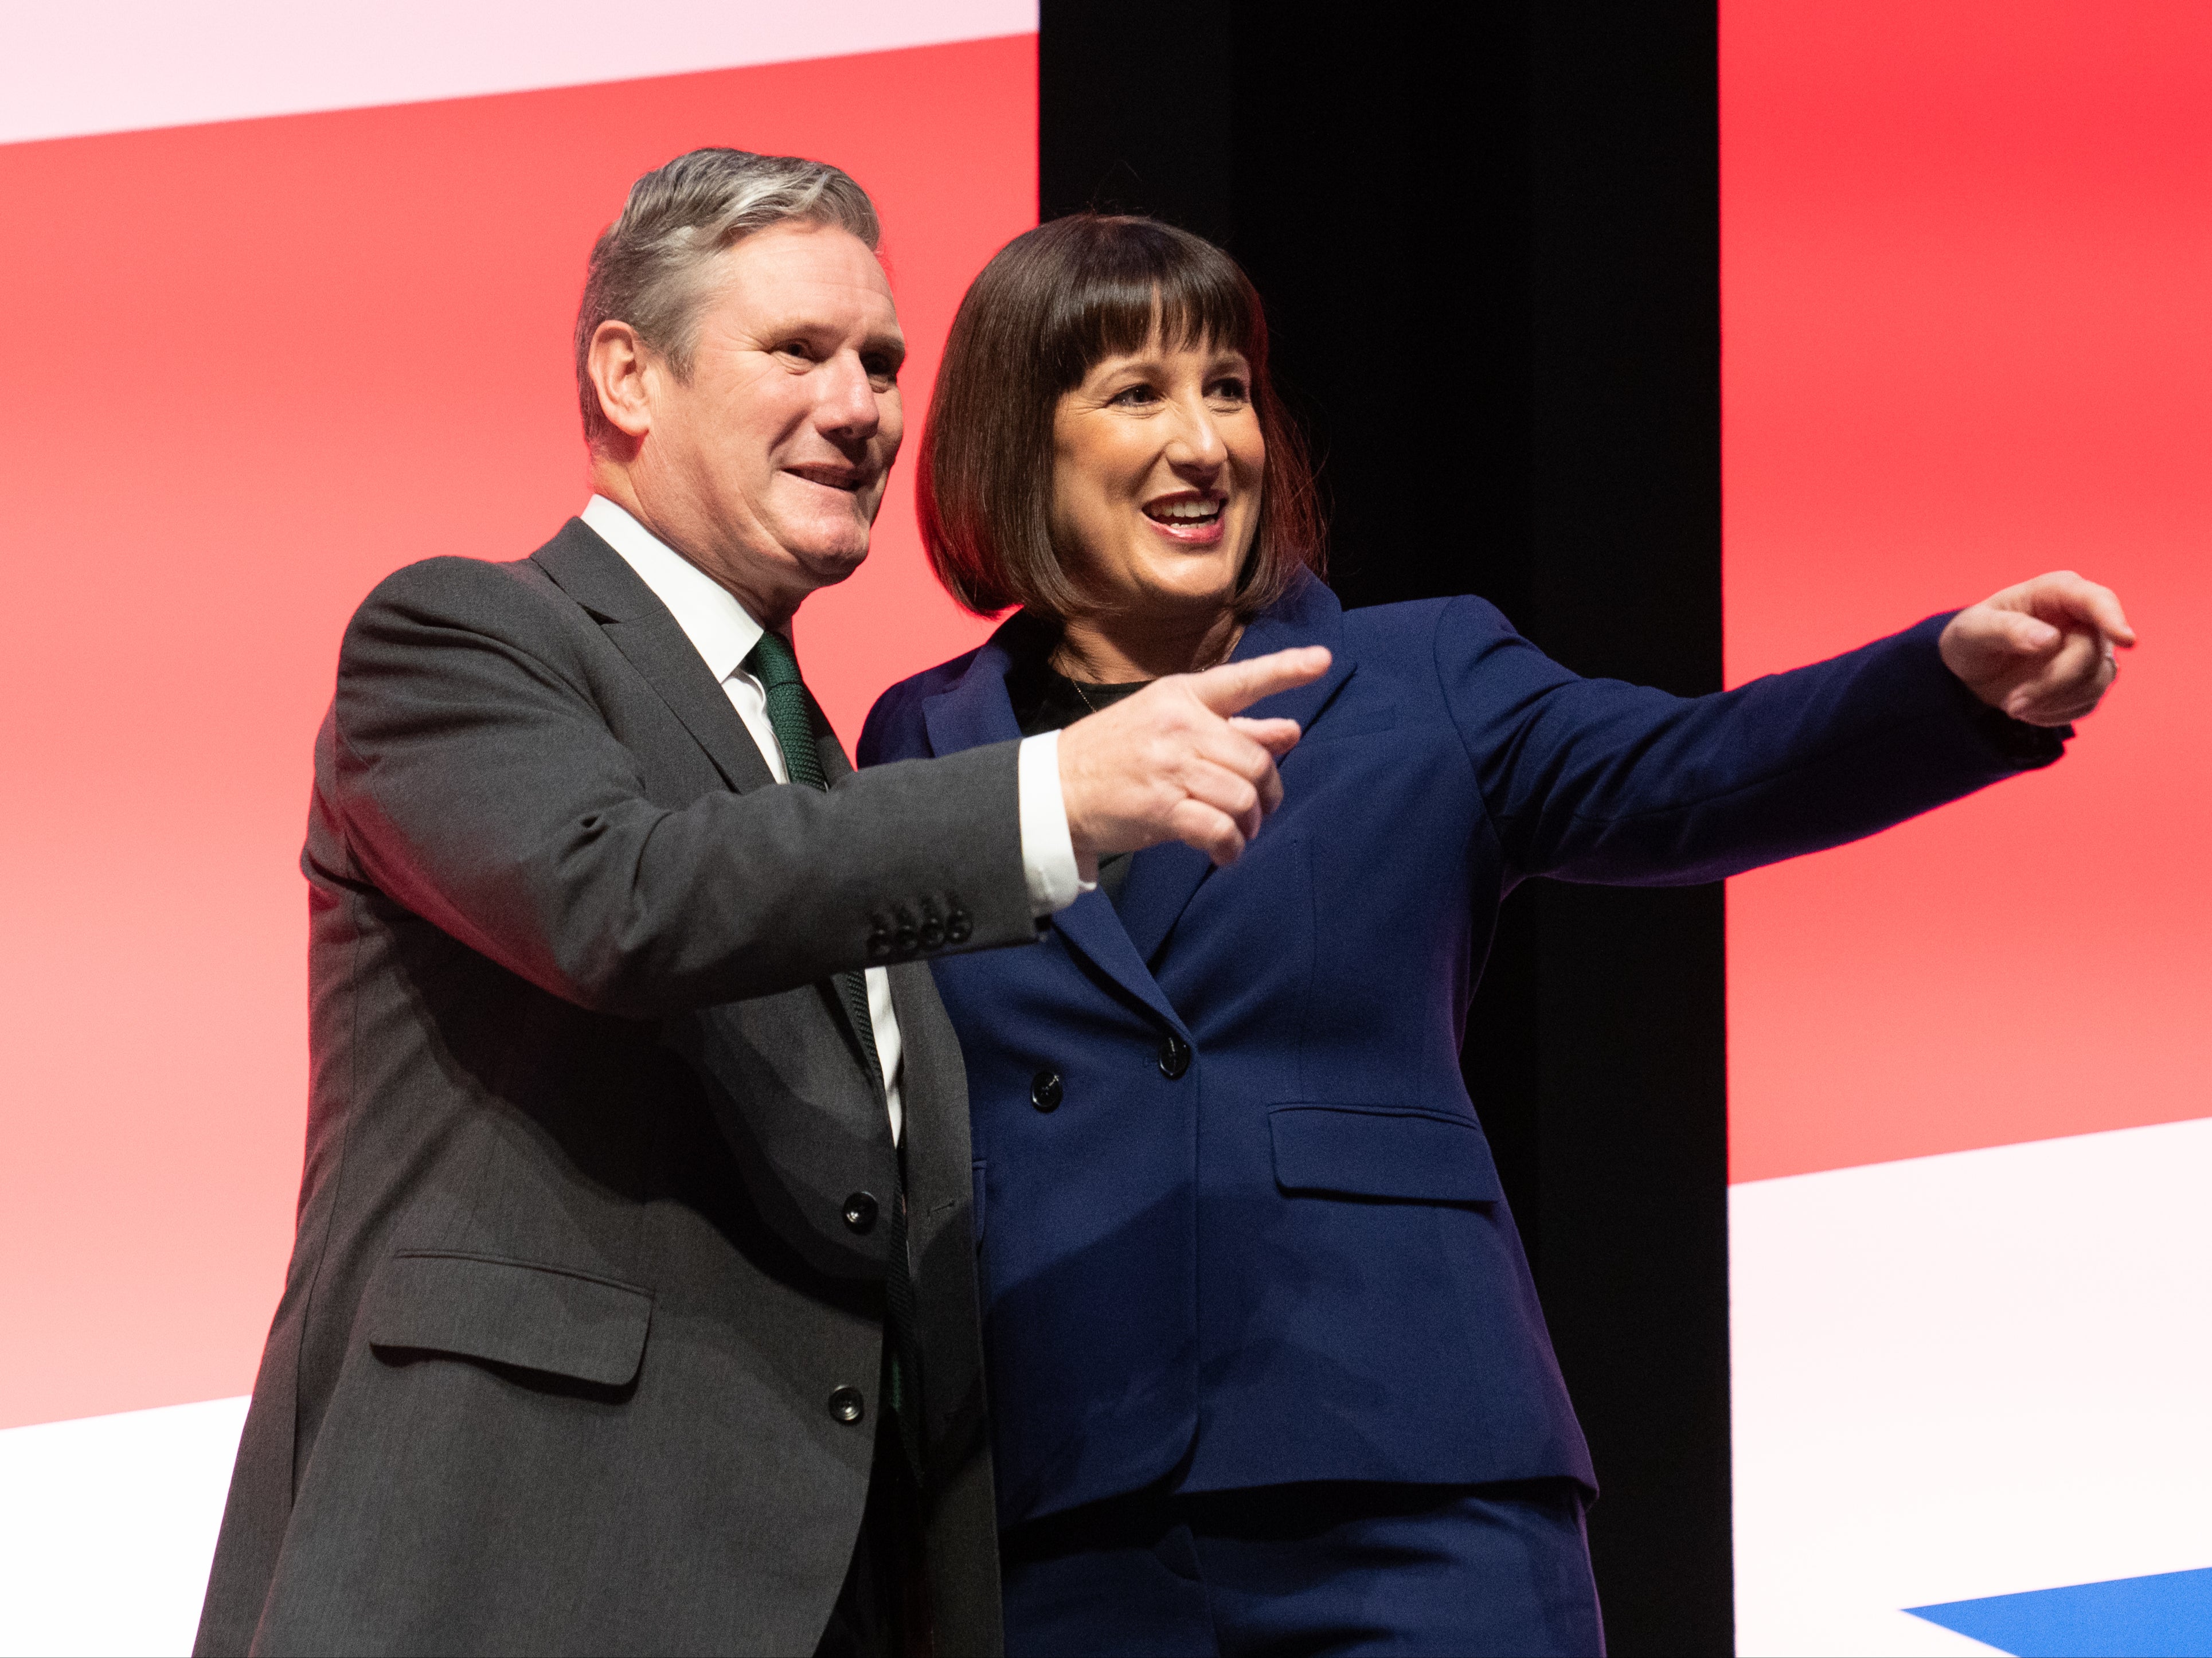 The success of Rachel Reeves’s conference speech poses a problem for Keir Starmer